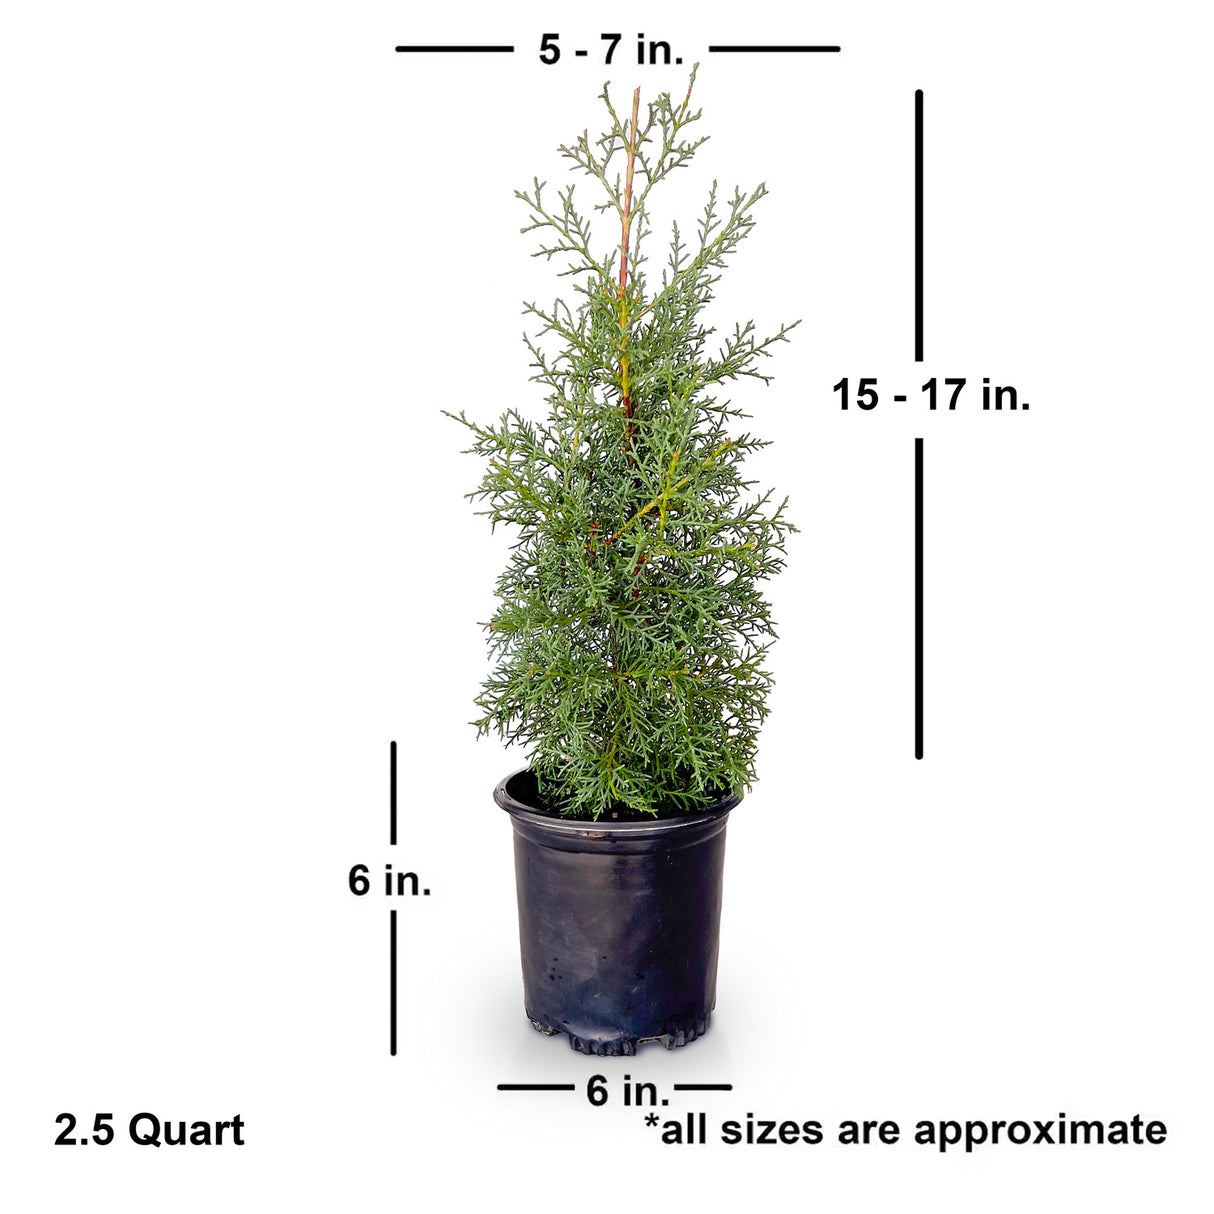 2.5 quart carolina sapphire cypress tree shipped dimensions. Ships at approx 5-7 inches wide by 15-7 inches tall